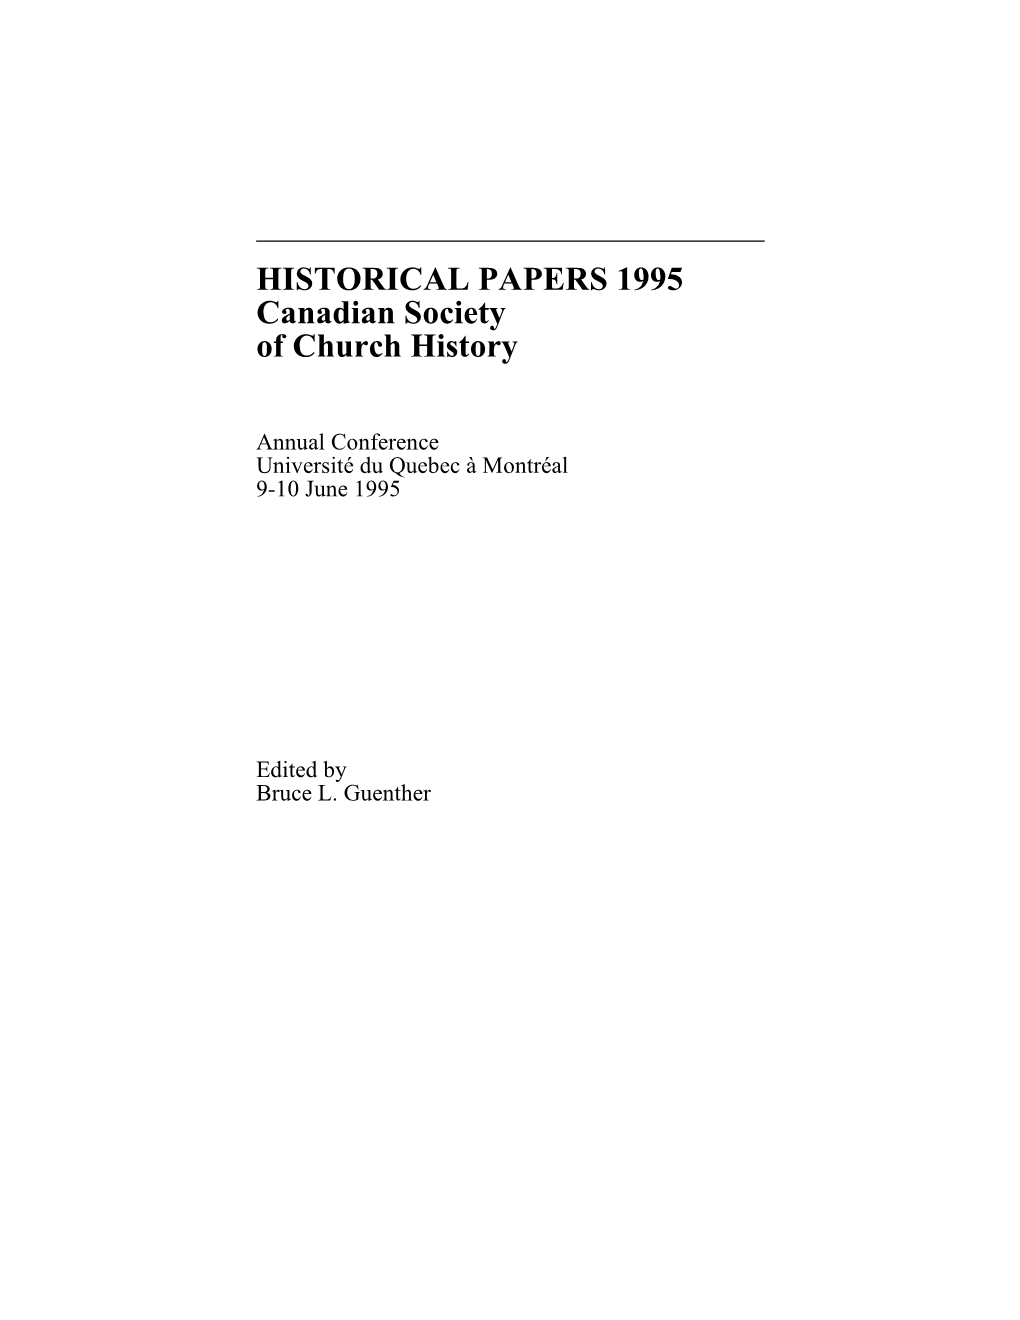 HISTORICAL PAPERS 1995 Canadian Society of Church History